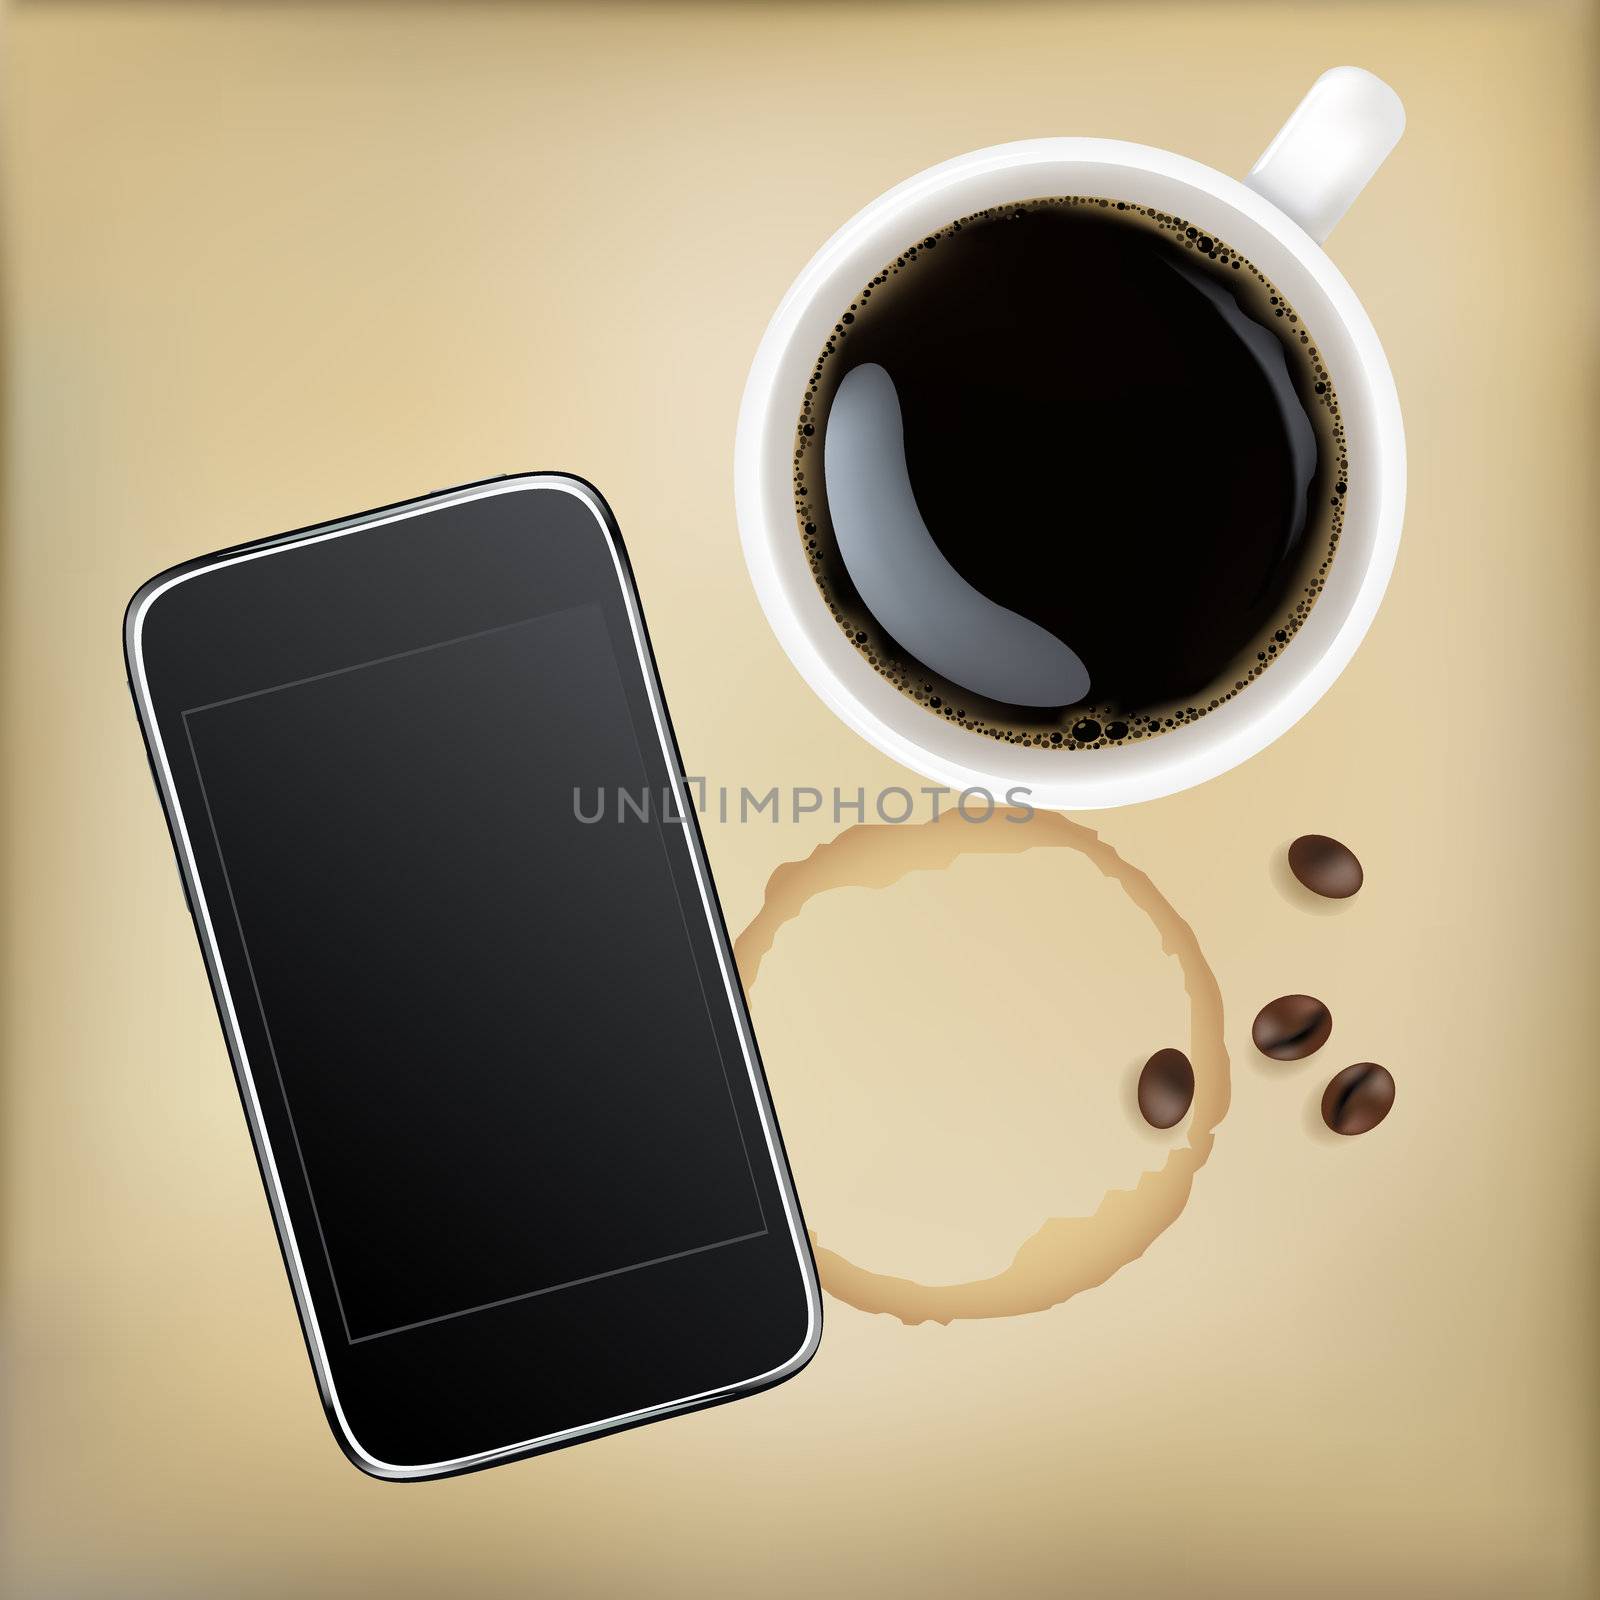 Cup Of Coffee With Mobile Phone, Vector Illustration
